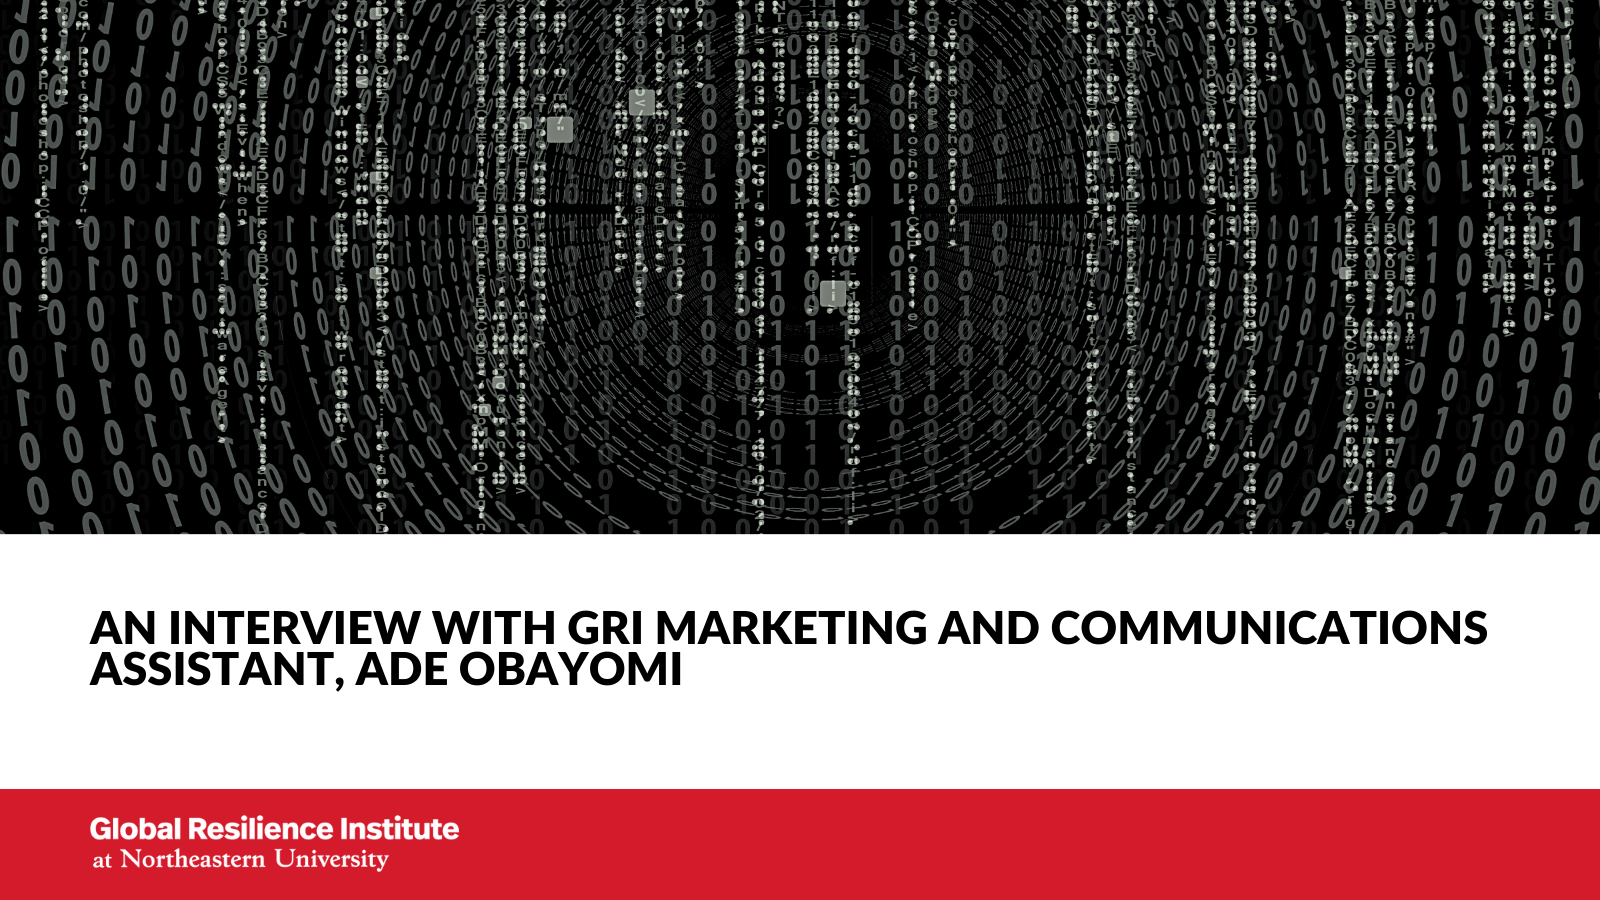 An Interview with GRI Marketing and Communications Assistant, Ade Obayomi